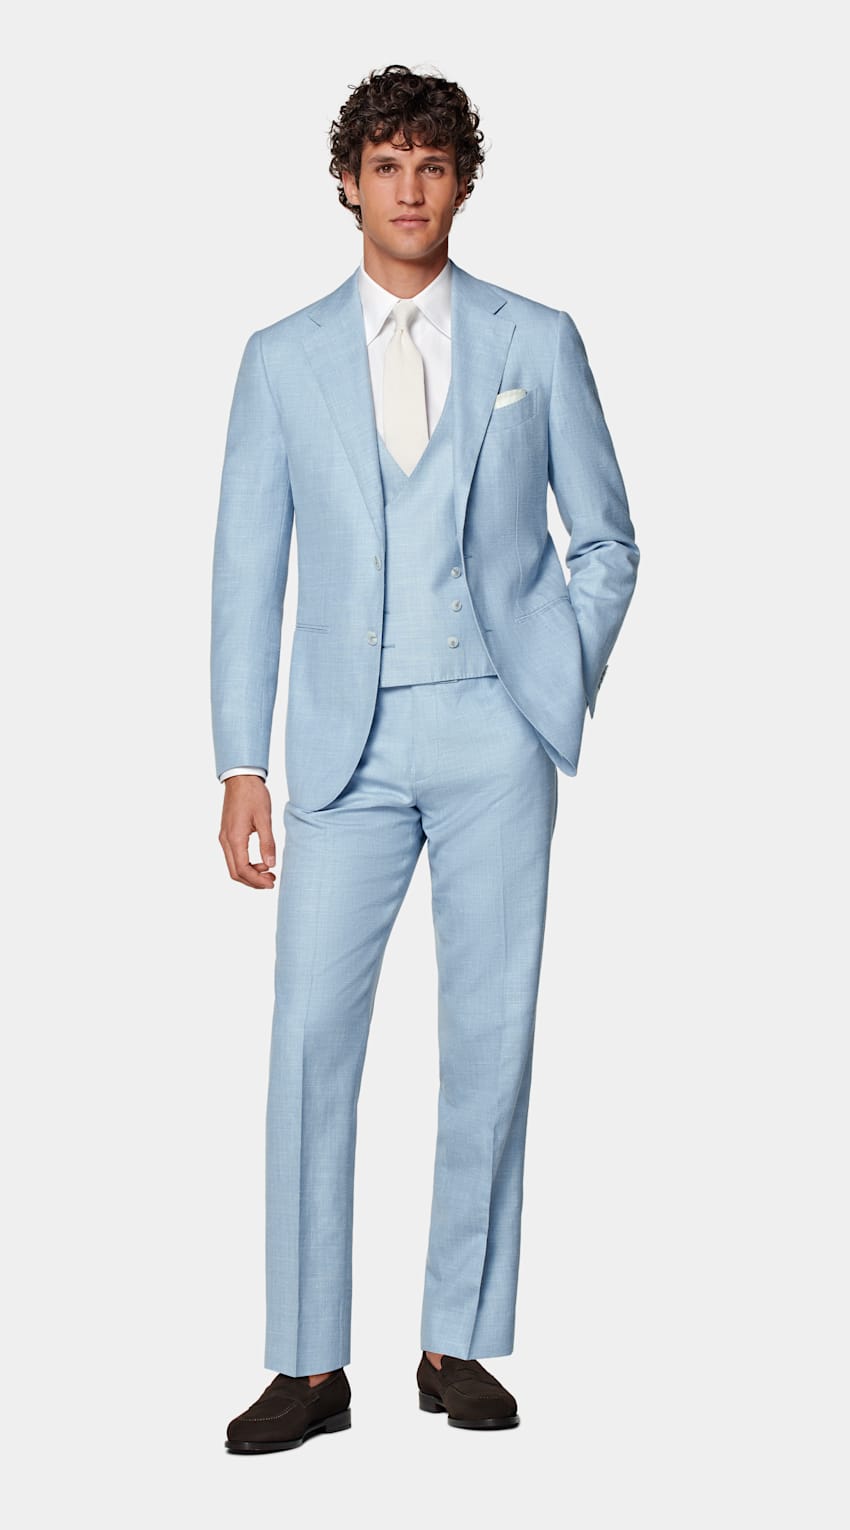 SUITSUPPLY Summer Wool Silk Linen by E.Thomas, Italy Light Blue Three-Piece Tailored Fit Havana Suit